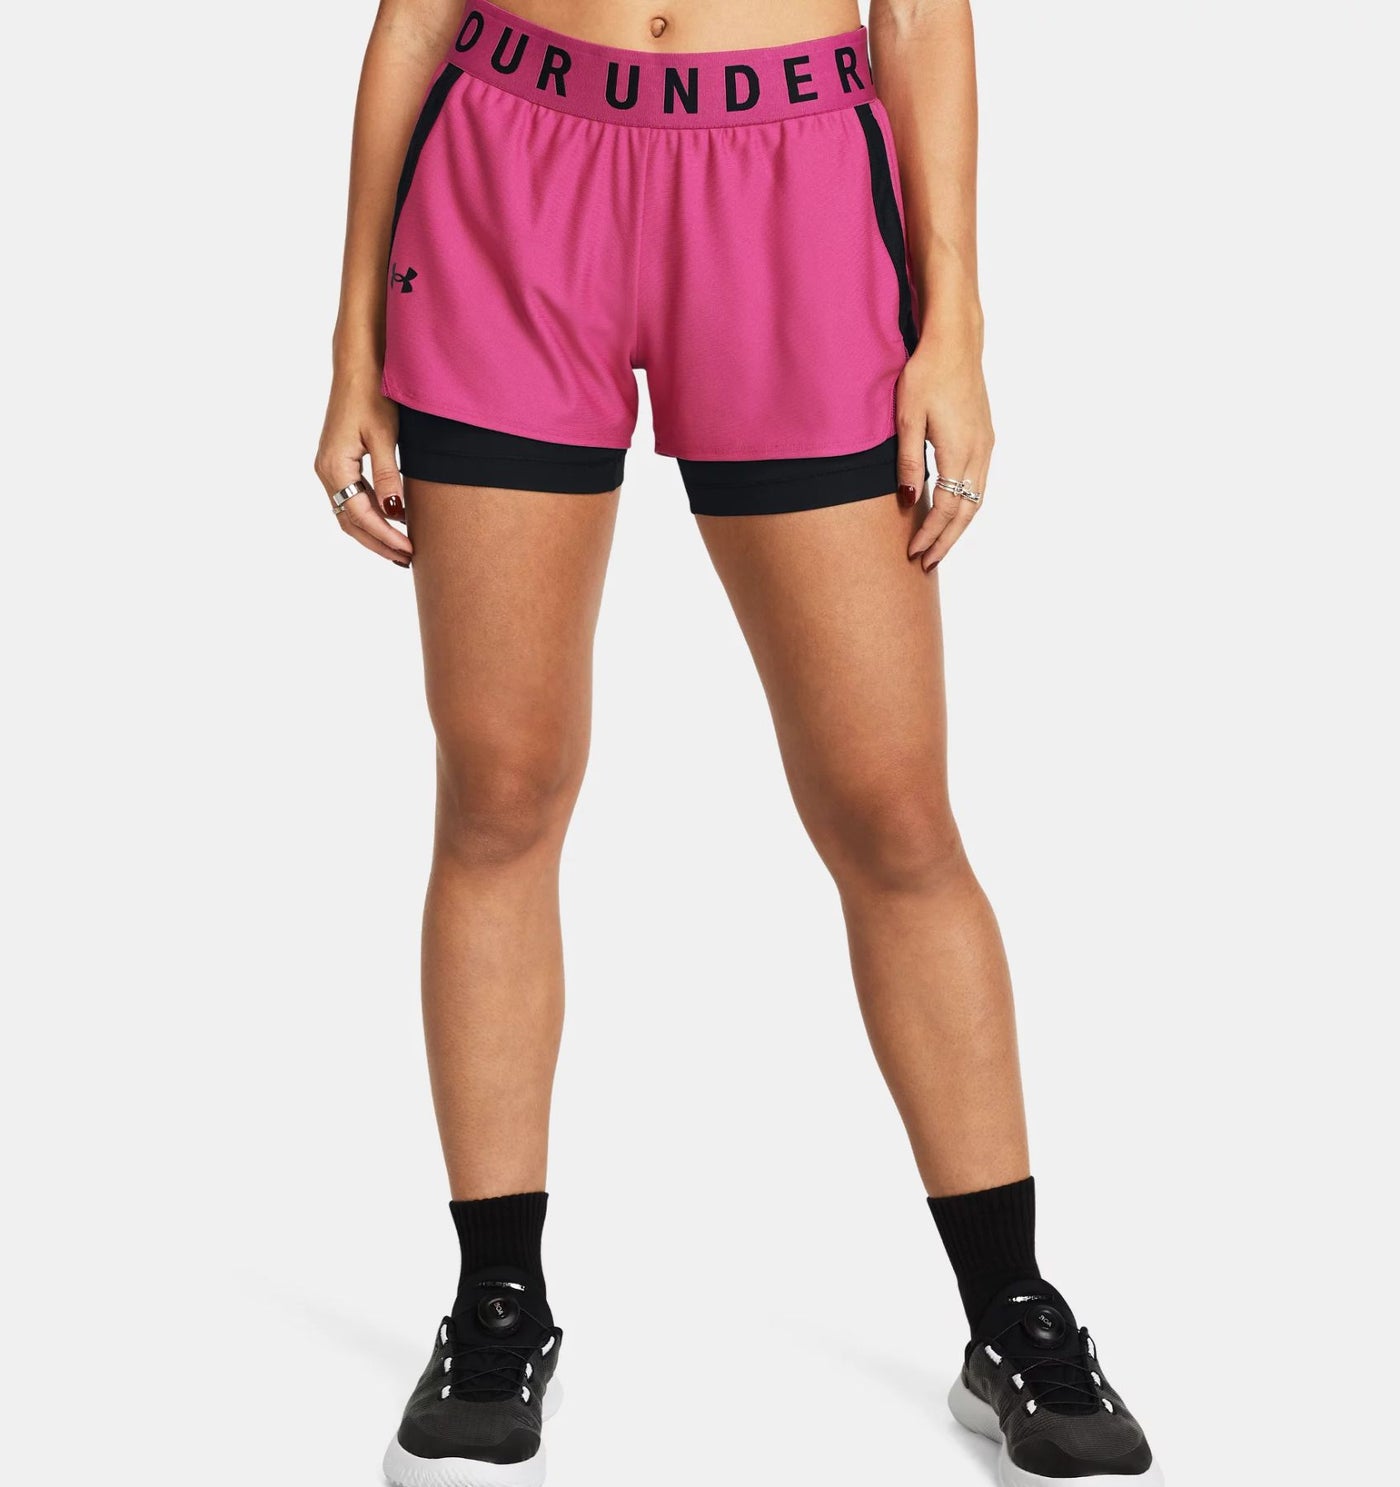 1351981-686 - Shorts - Under Armour